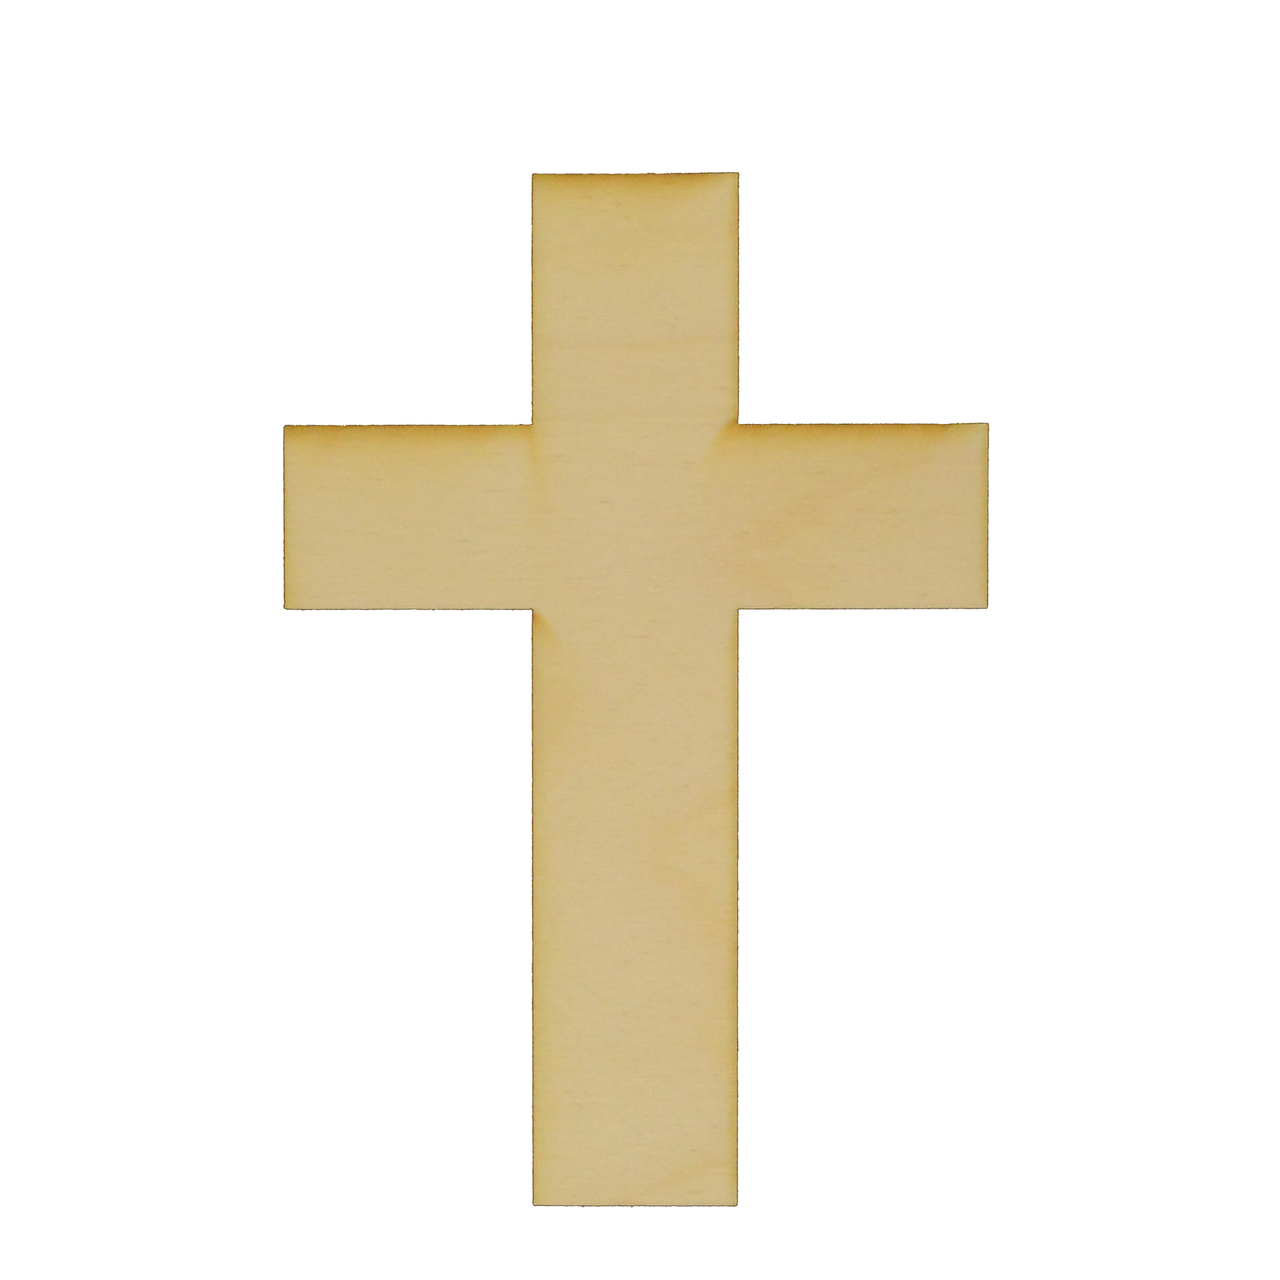 100 Pack Unfinished Wooden Crosses for Crafts, Bulk Cross Ornaments for Easter T